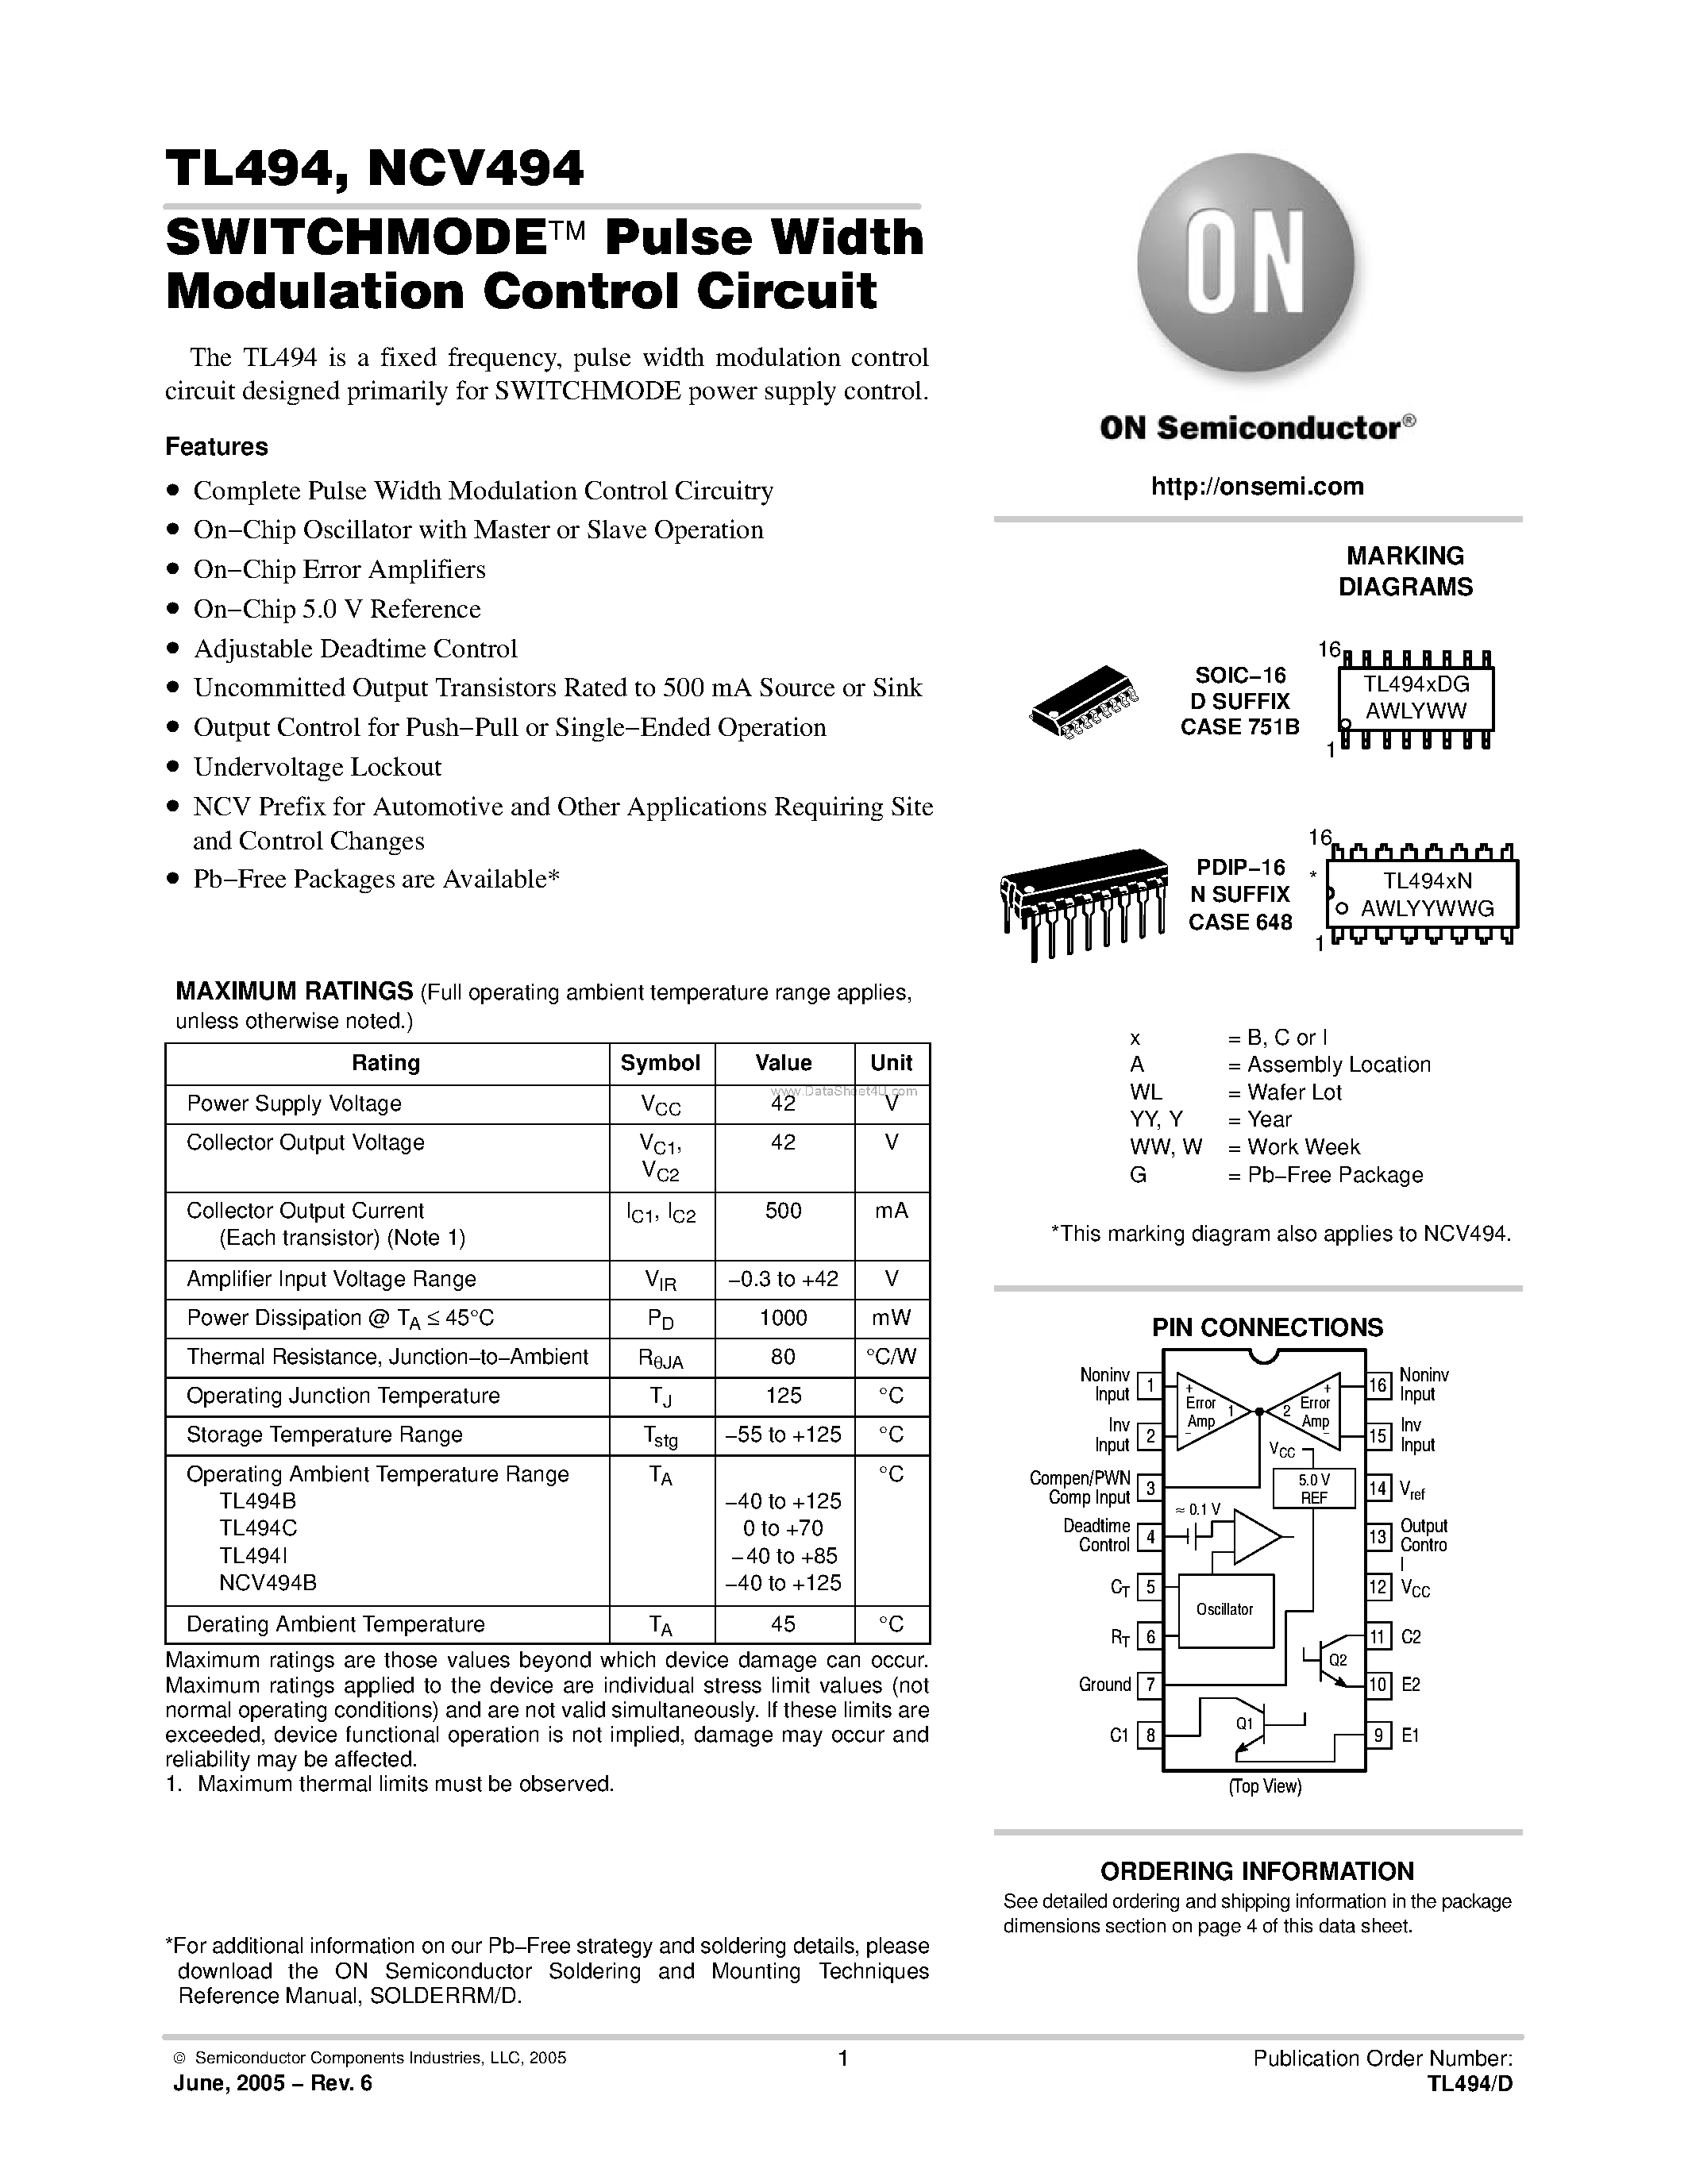 Datasheet TL494CD - SWITCHMODE PULSE WIDTH MODULATION CONTROL CIRCUIT page 1